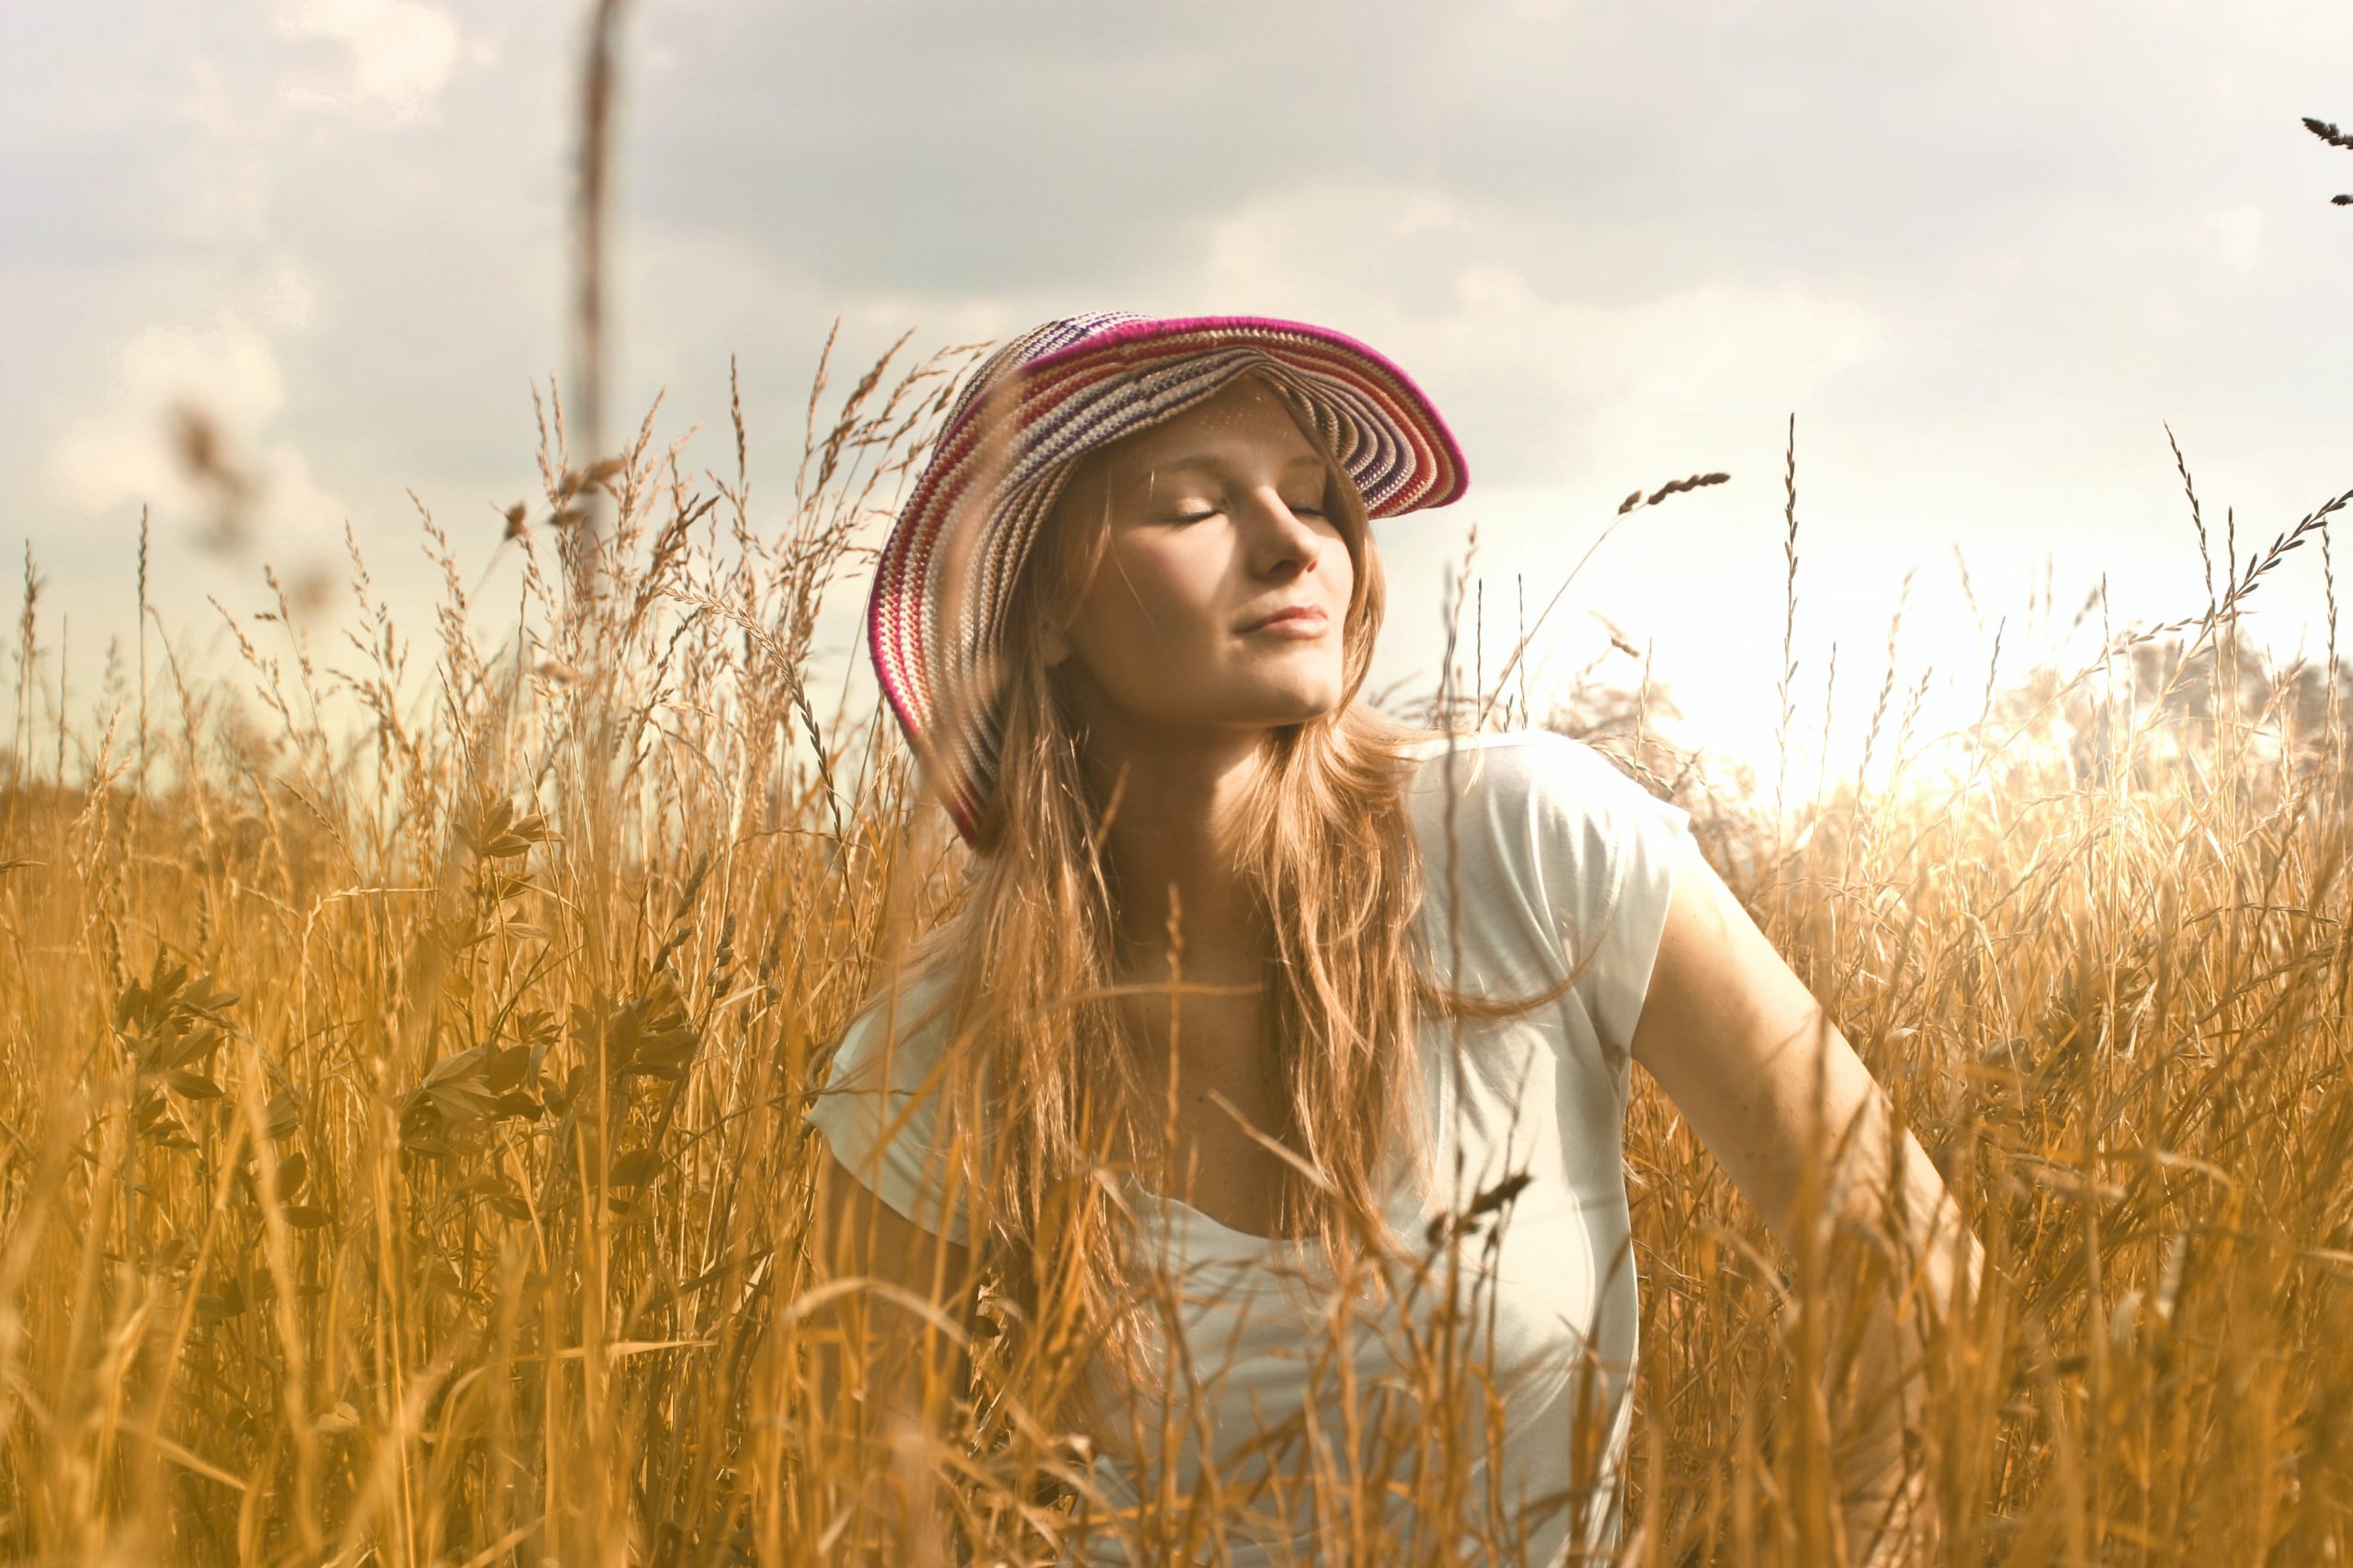 A woman standing in a grain field, her eyes closed in the sun.